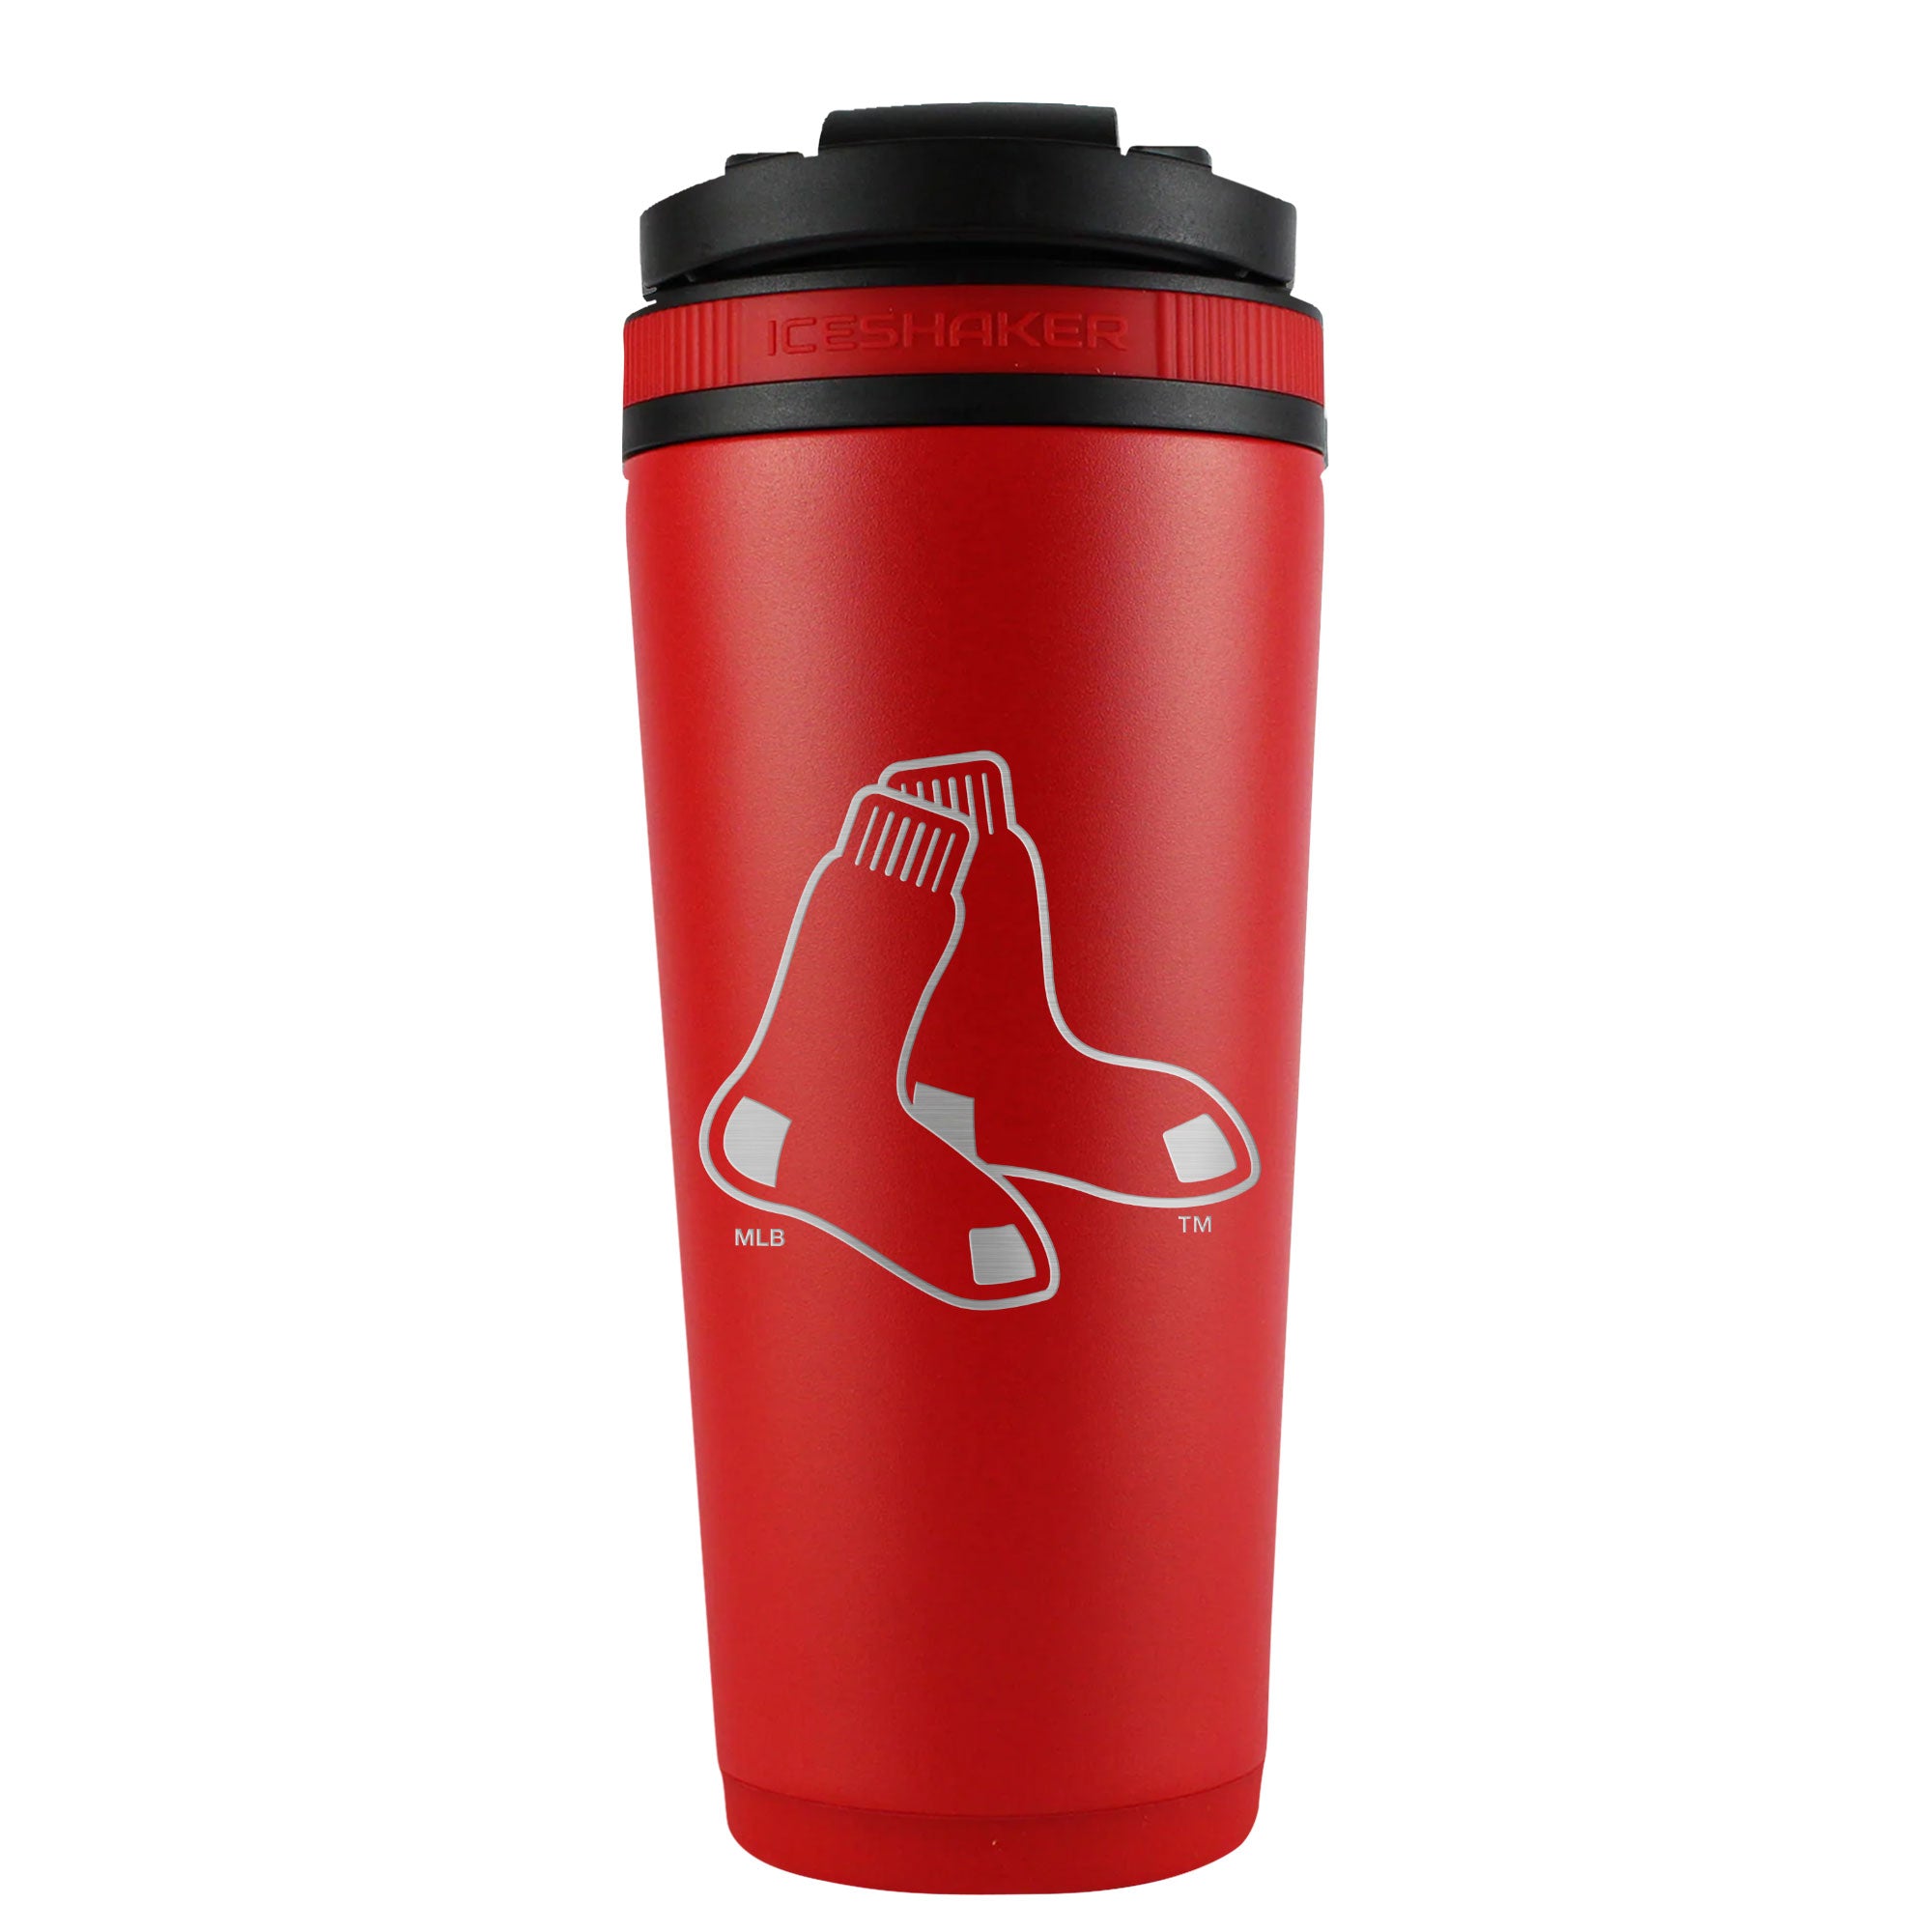 Officially Licensed Boston Red Sox 26oz Ice Shaker - Red